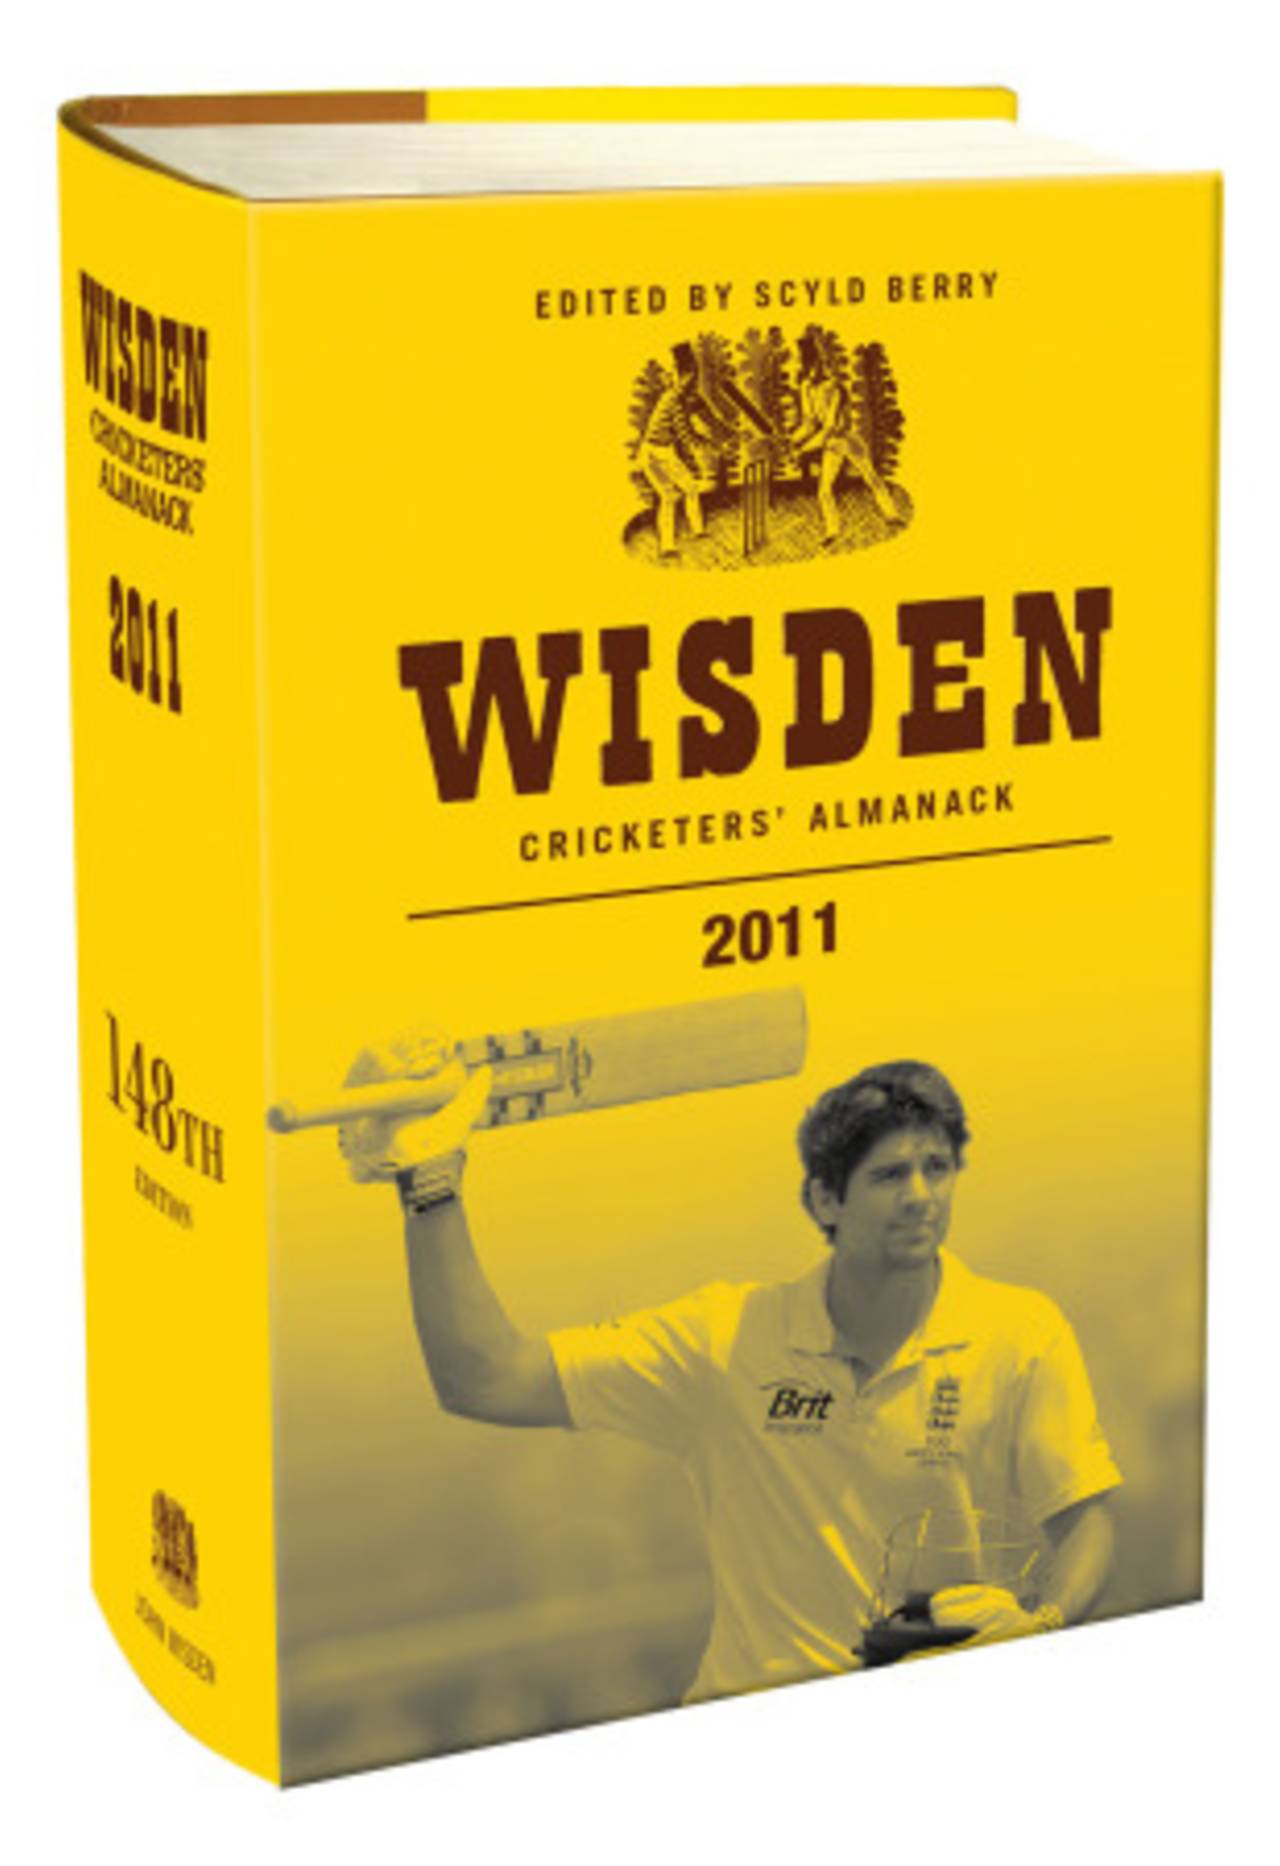 Alastair Cook adorns the cover of the 2011 Wisden Cricketers' Almanack